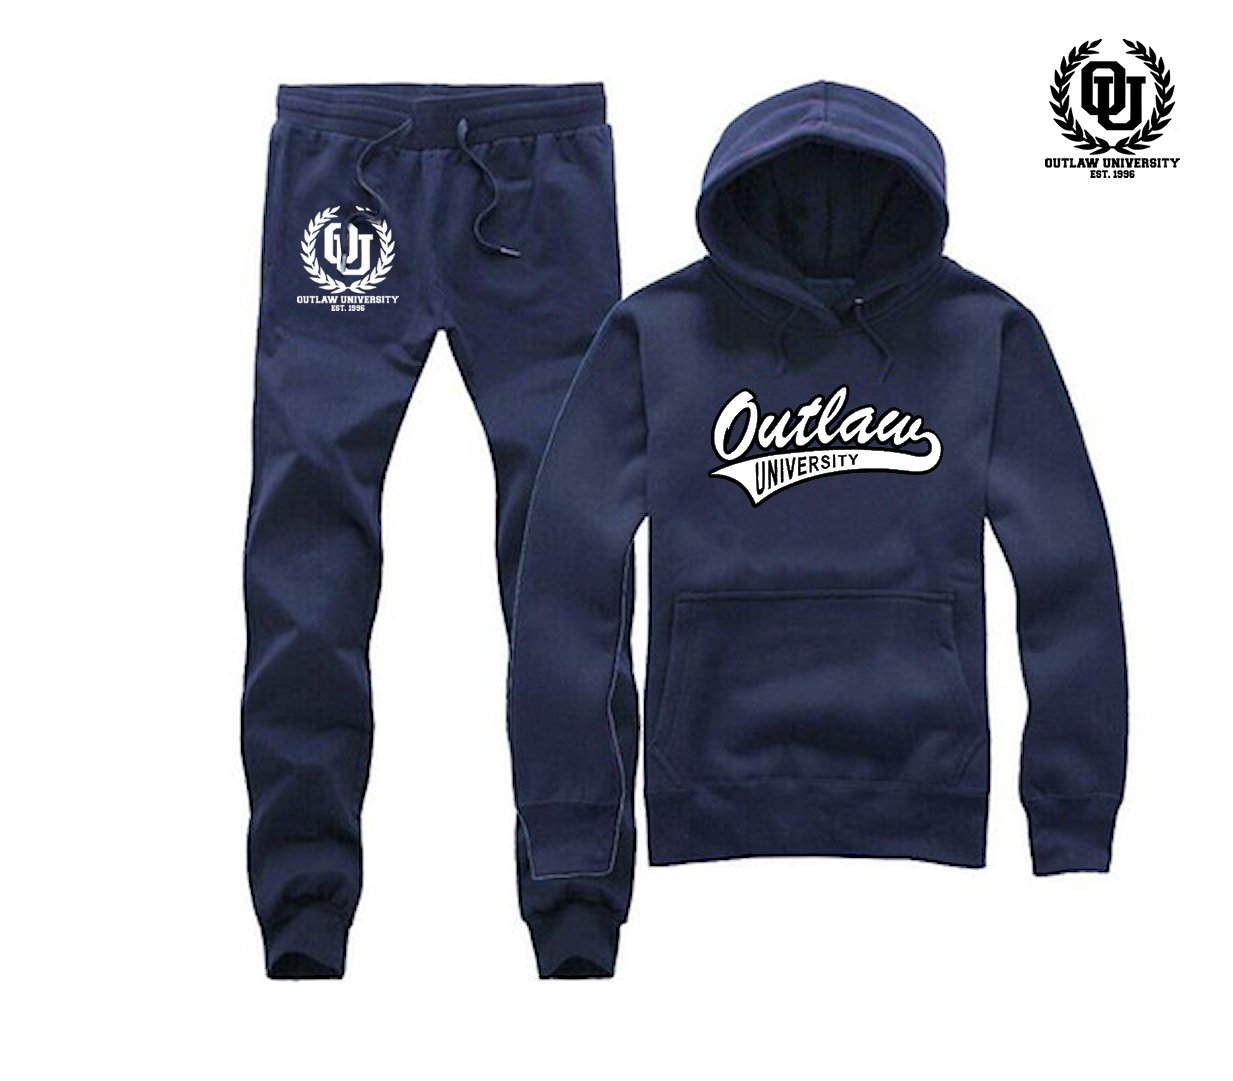 Outlaw Uni Unisex Sweatsuit - Comes in Black, Grey, Navy Blue, / Outlaw ...